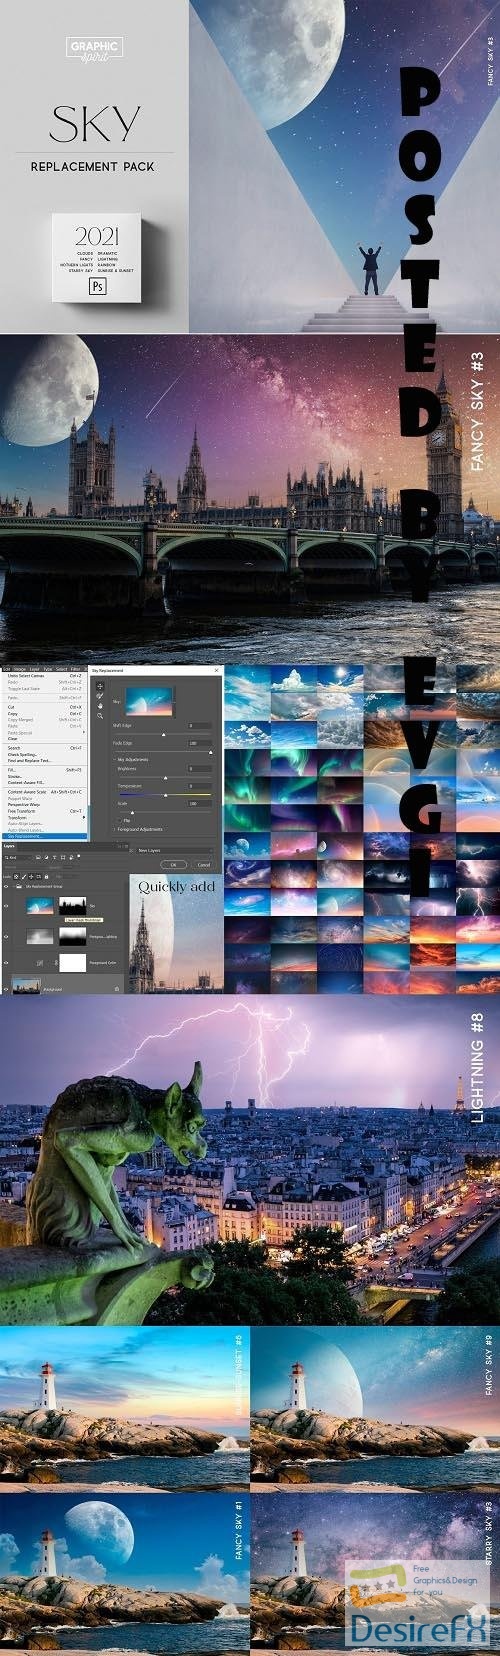 Sky Replacement Pack Photoshop 2021 - 5750499